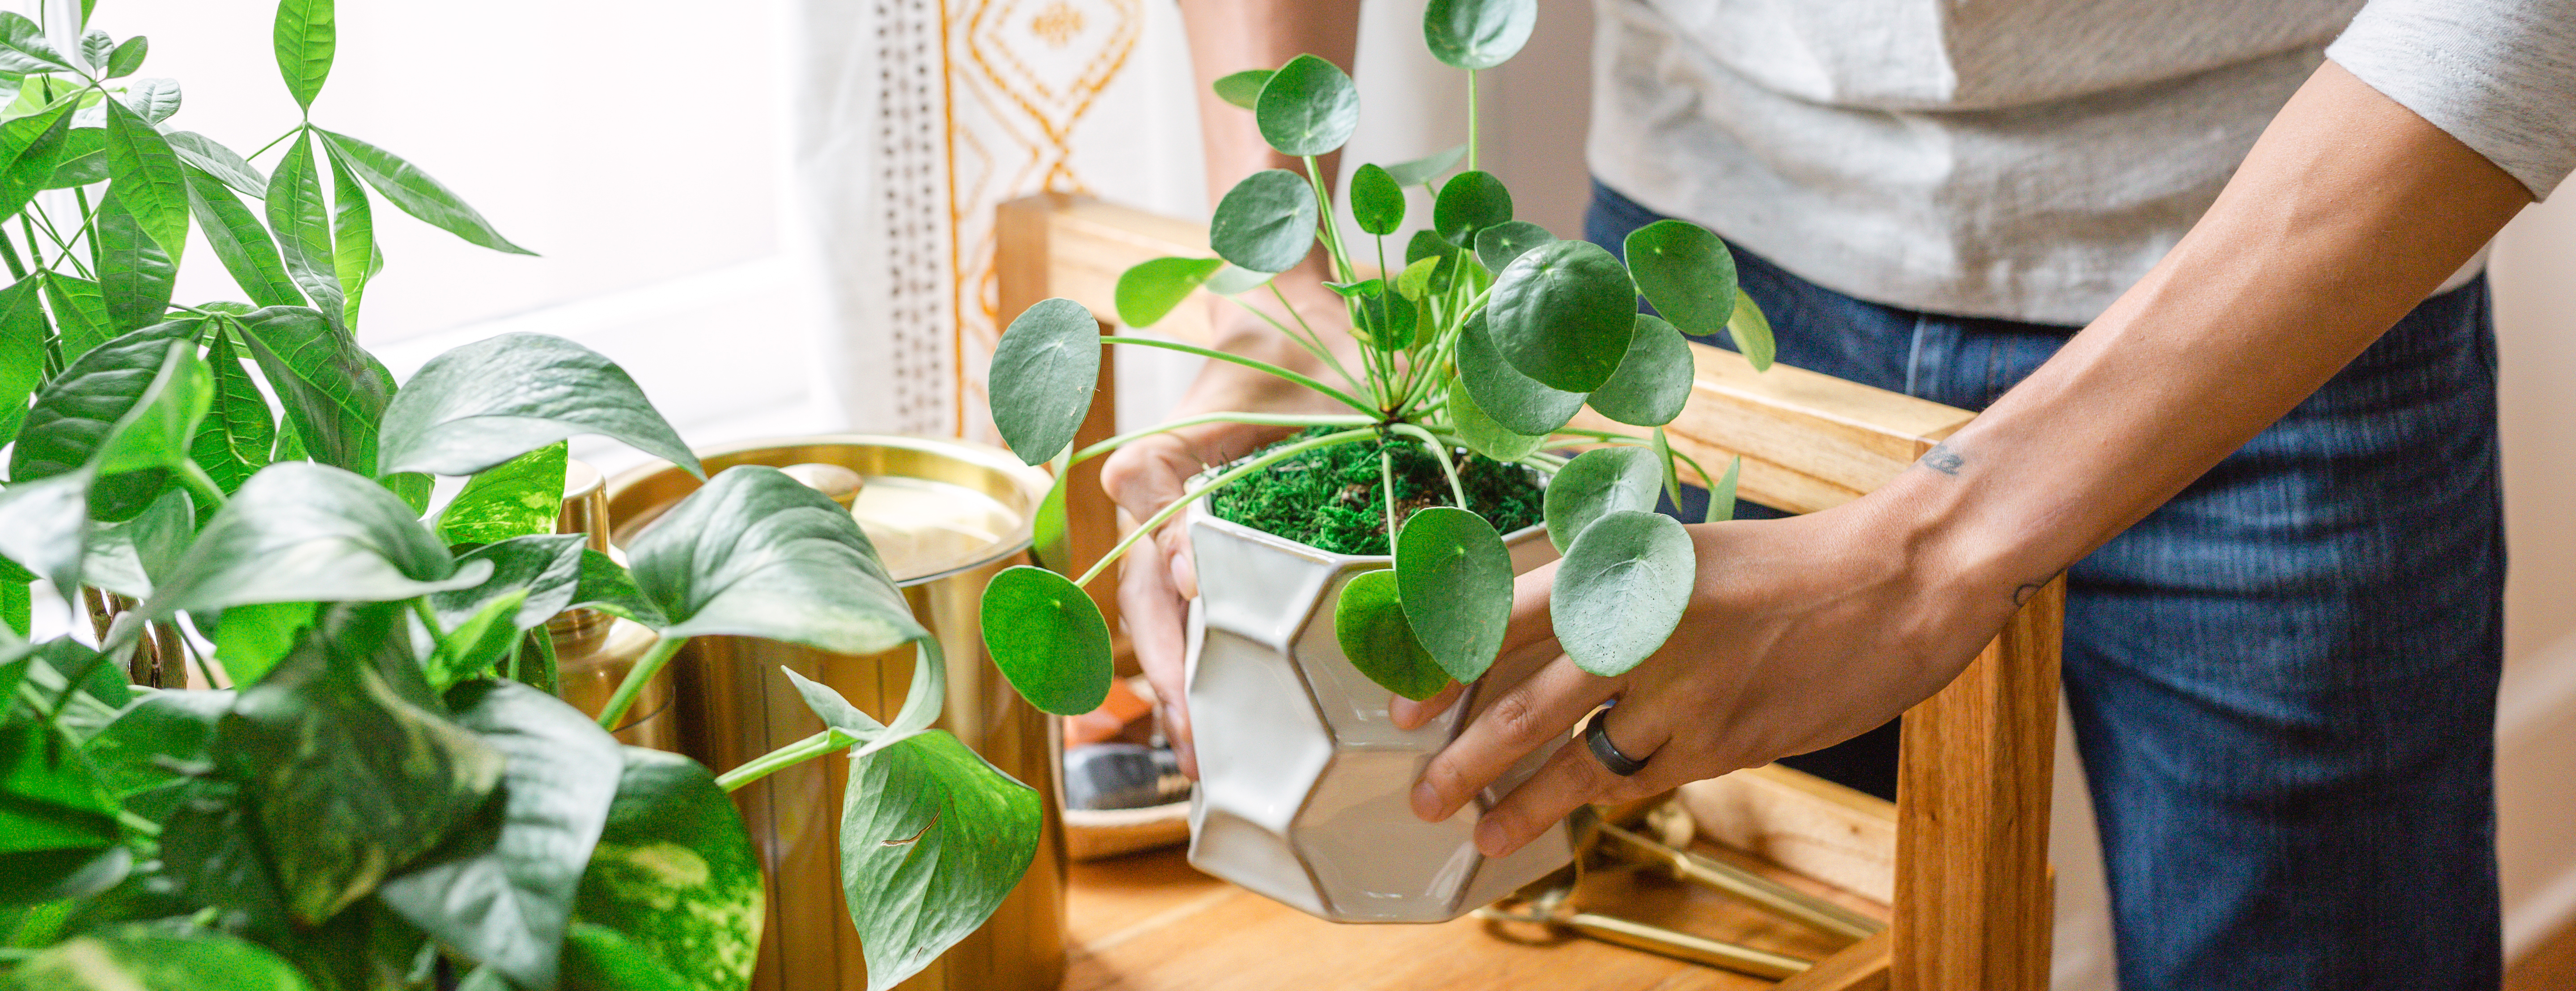 Hands and various indoor plants including a pothos plant and a pilea plant